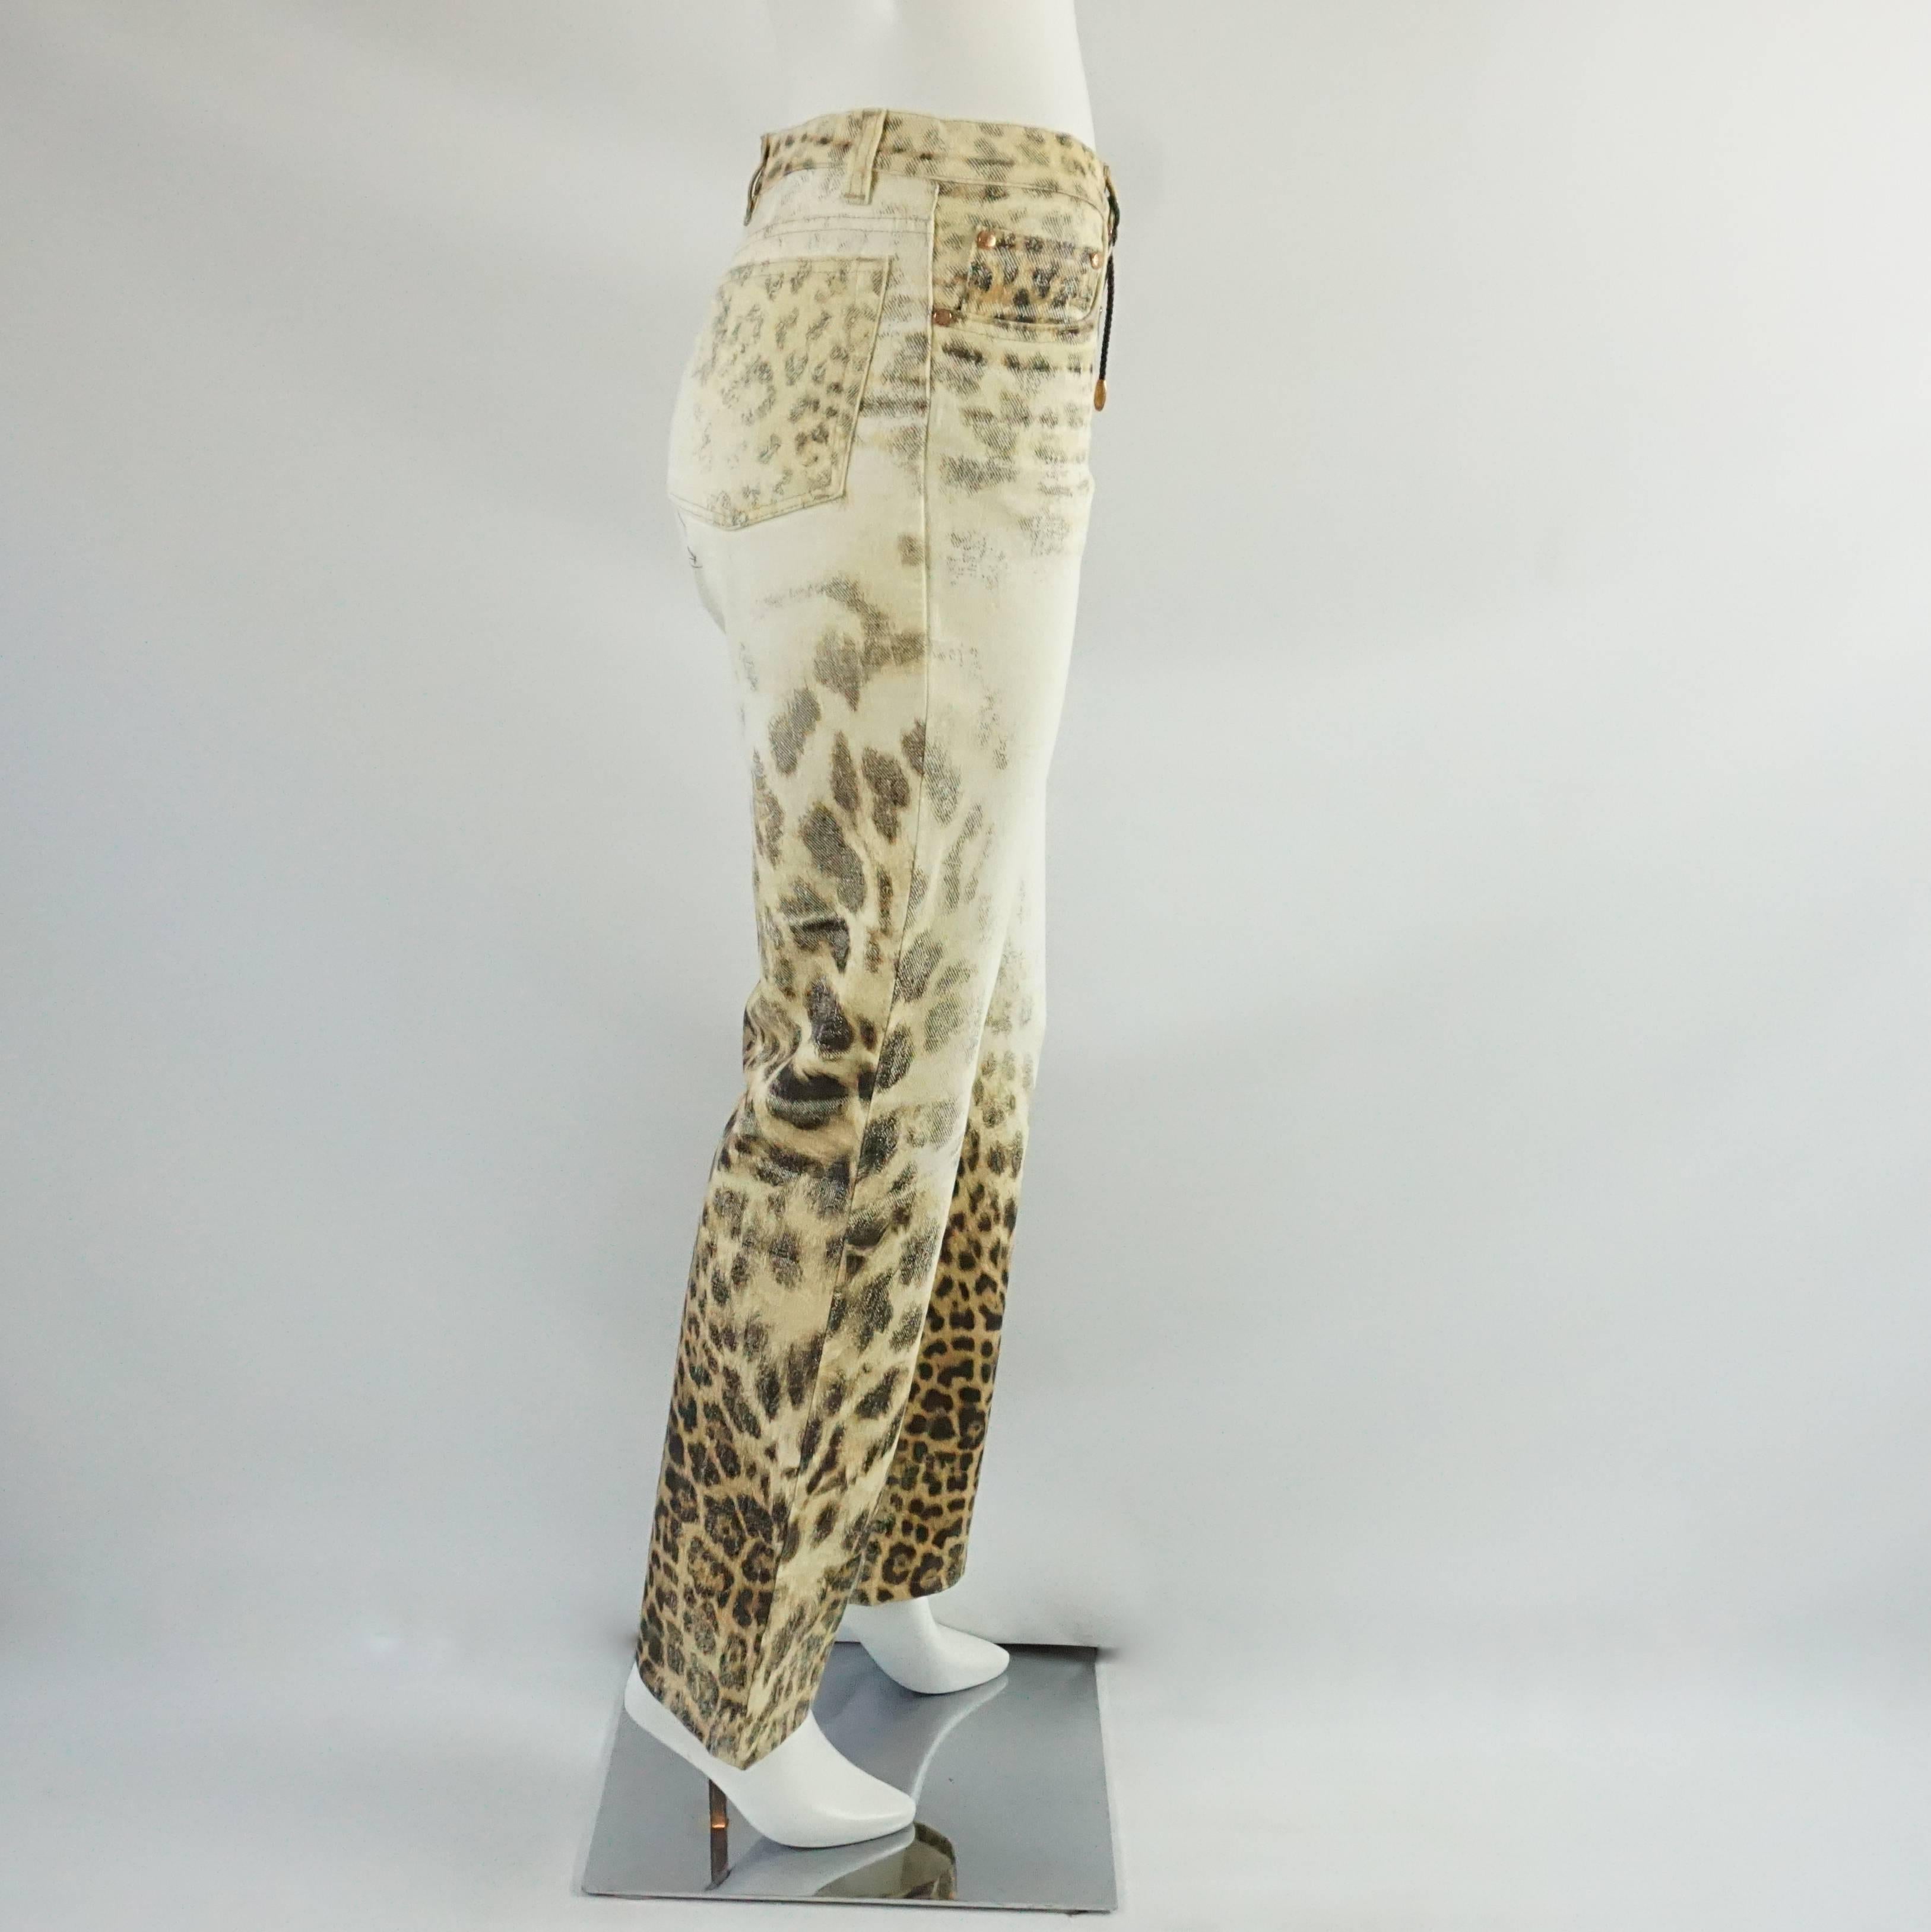 These unique Roberto Cavalli jeans are ivory with a tan and brown animal print on them. They have belt loops and have "Roberto Cavalli" written among the animal print. These jeans are in very good condition with some minor staining. Size